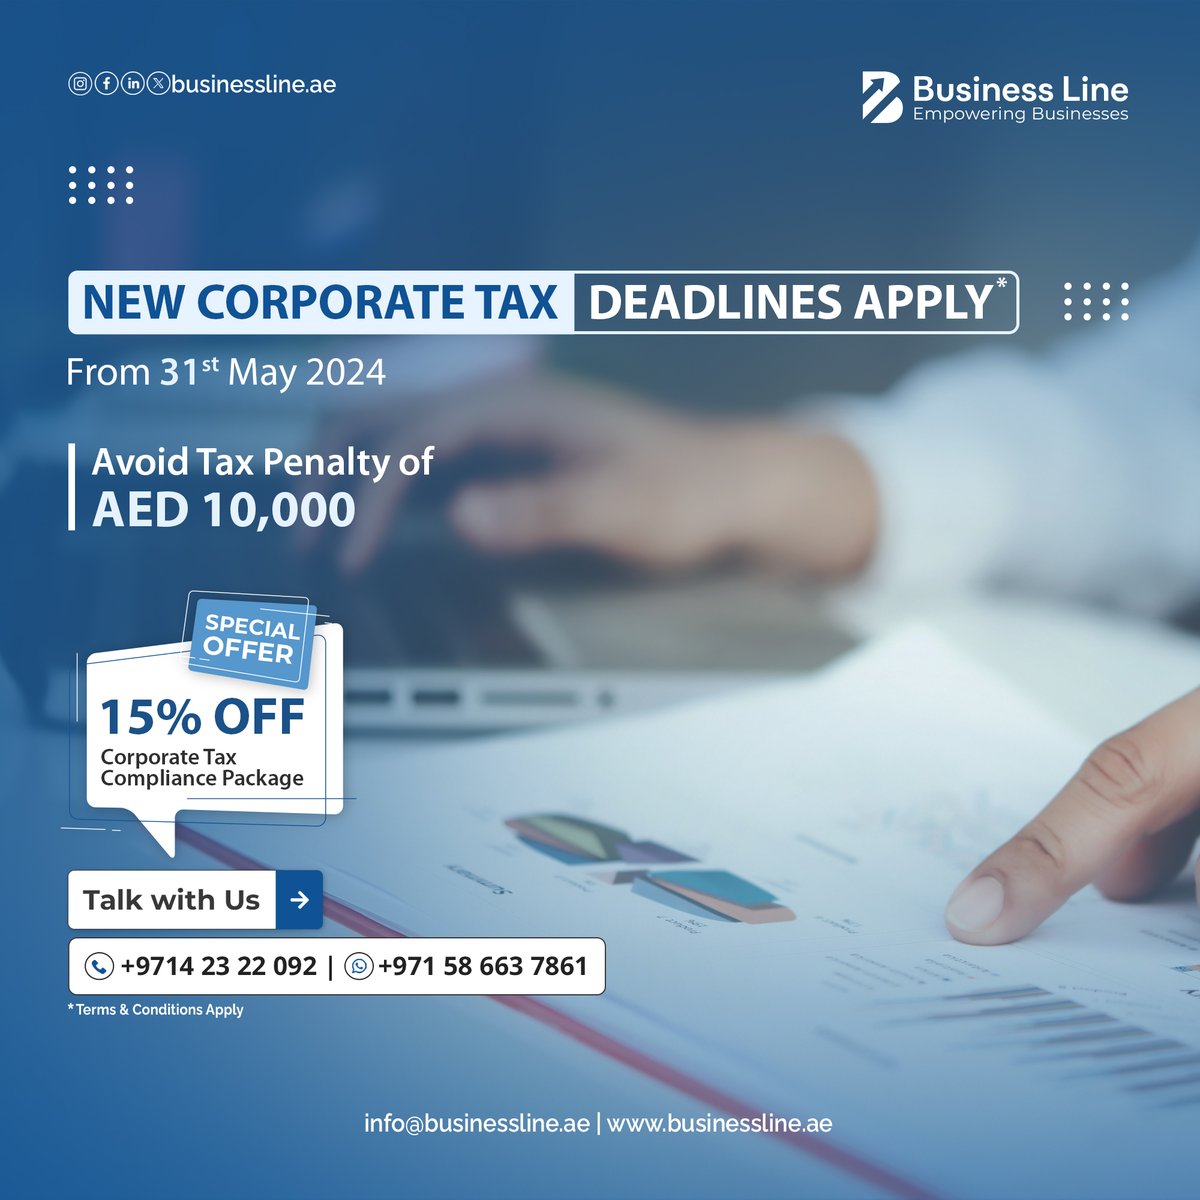 New Corporate Tax Deadlines Apply From 31st May 2024.

➢ Avoid Tax Penalty of AED 10,000
➢ 15% OFF - Corporate Tax,
Compliance Package

Talk with Us >
📞 +9714 23 22 092 | +971 58 663 7861
📧 info@businessline.ae
🌐 businessline.ae

#corporatetax #tax #corporatetaxtuae